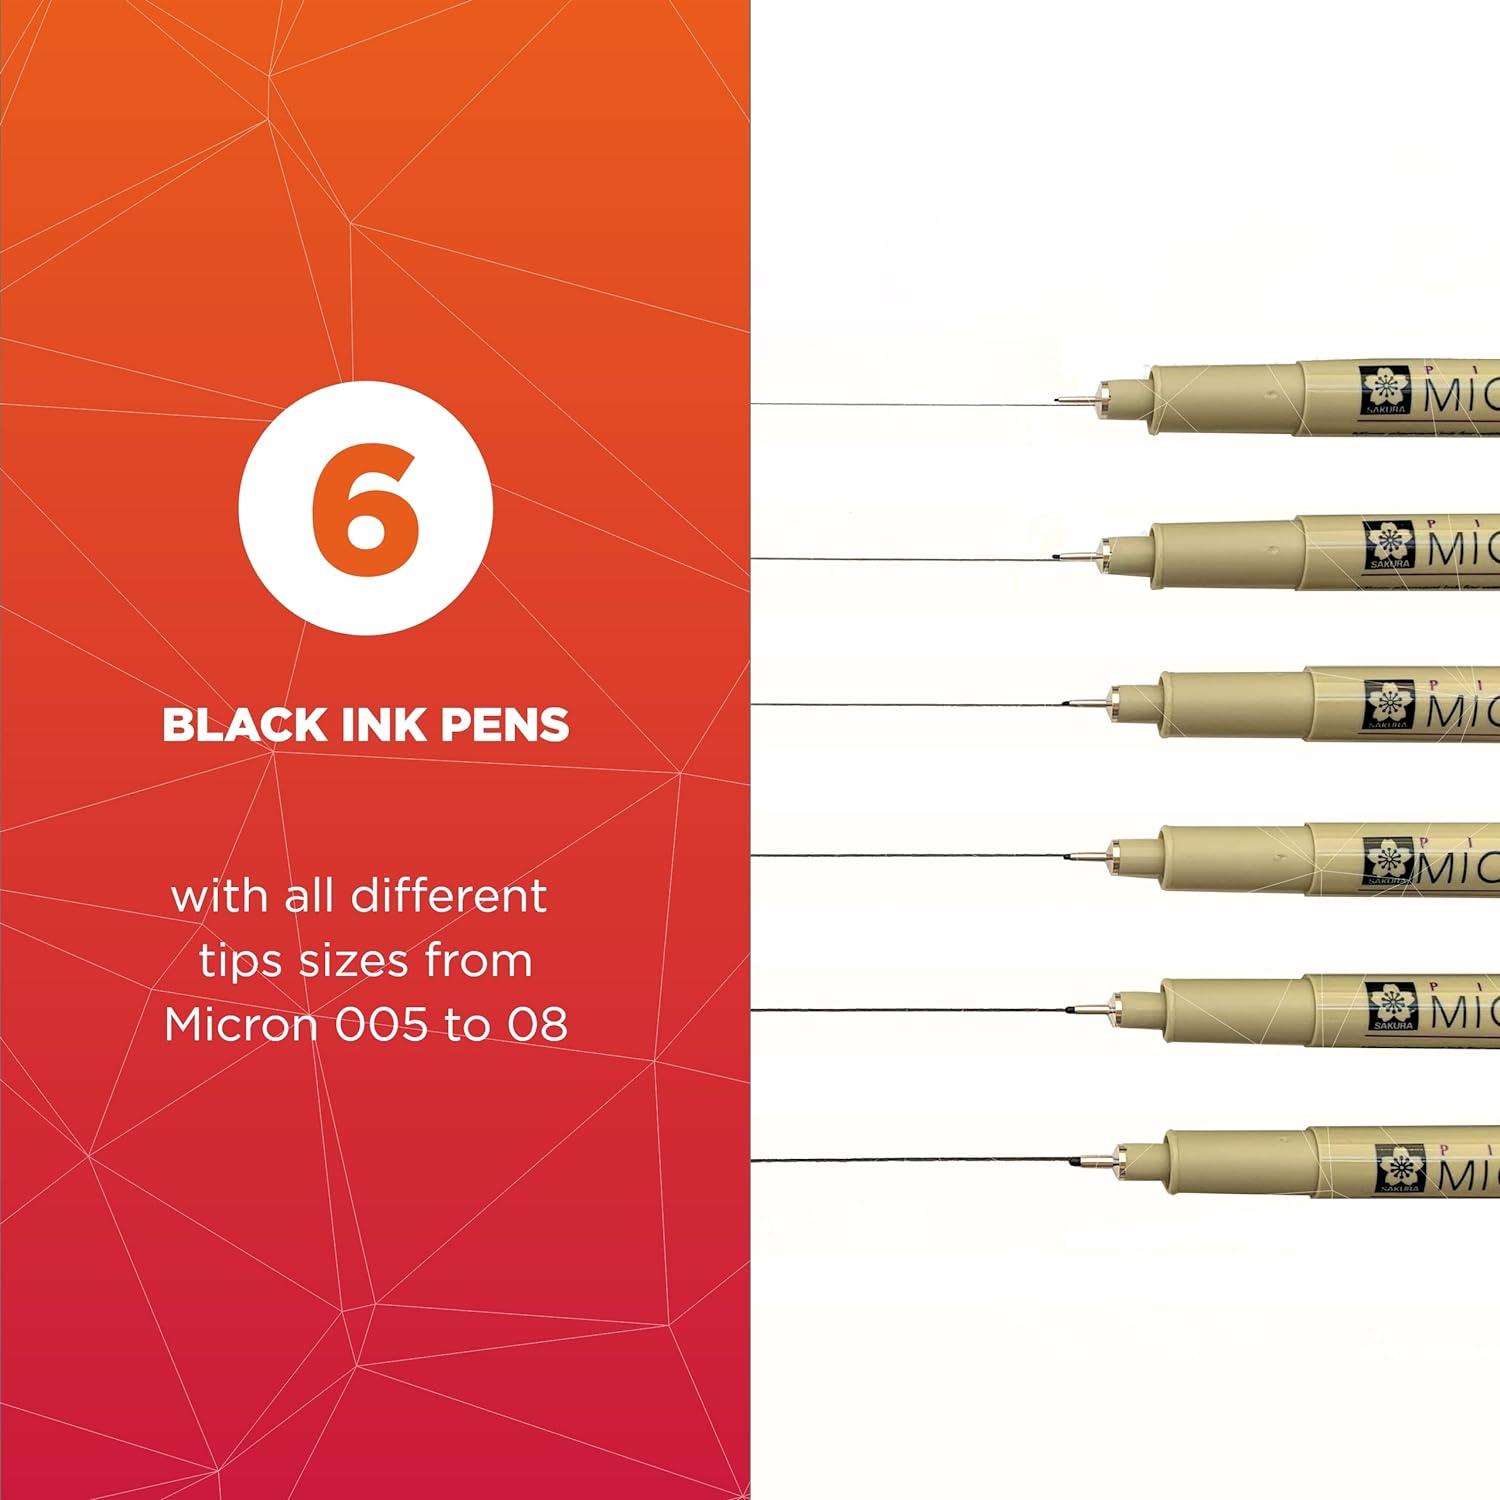 SAKURA Pigma Micron Fineliner Pens - Archival Black Ink Pens - Pens for Writing, Drawing, or Journaling - Assorted Point Sizes - 6 Pack